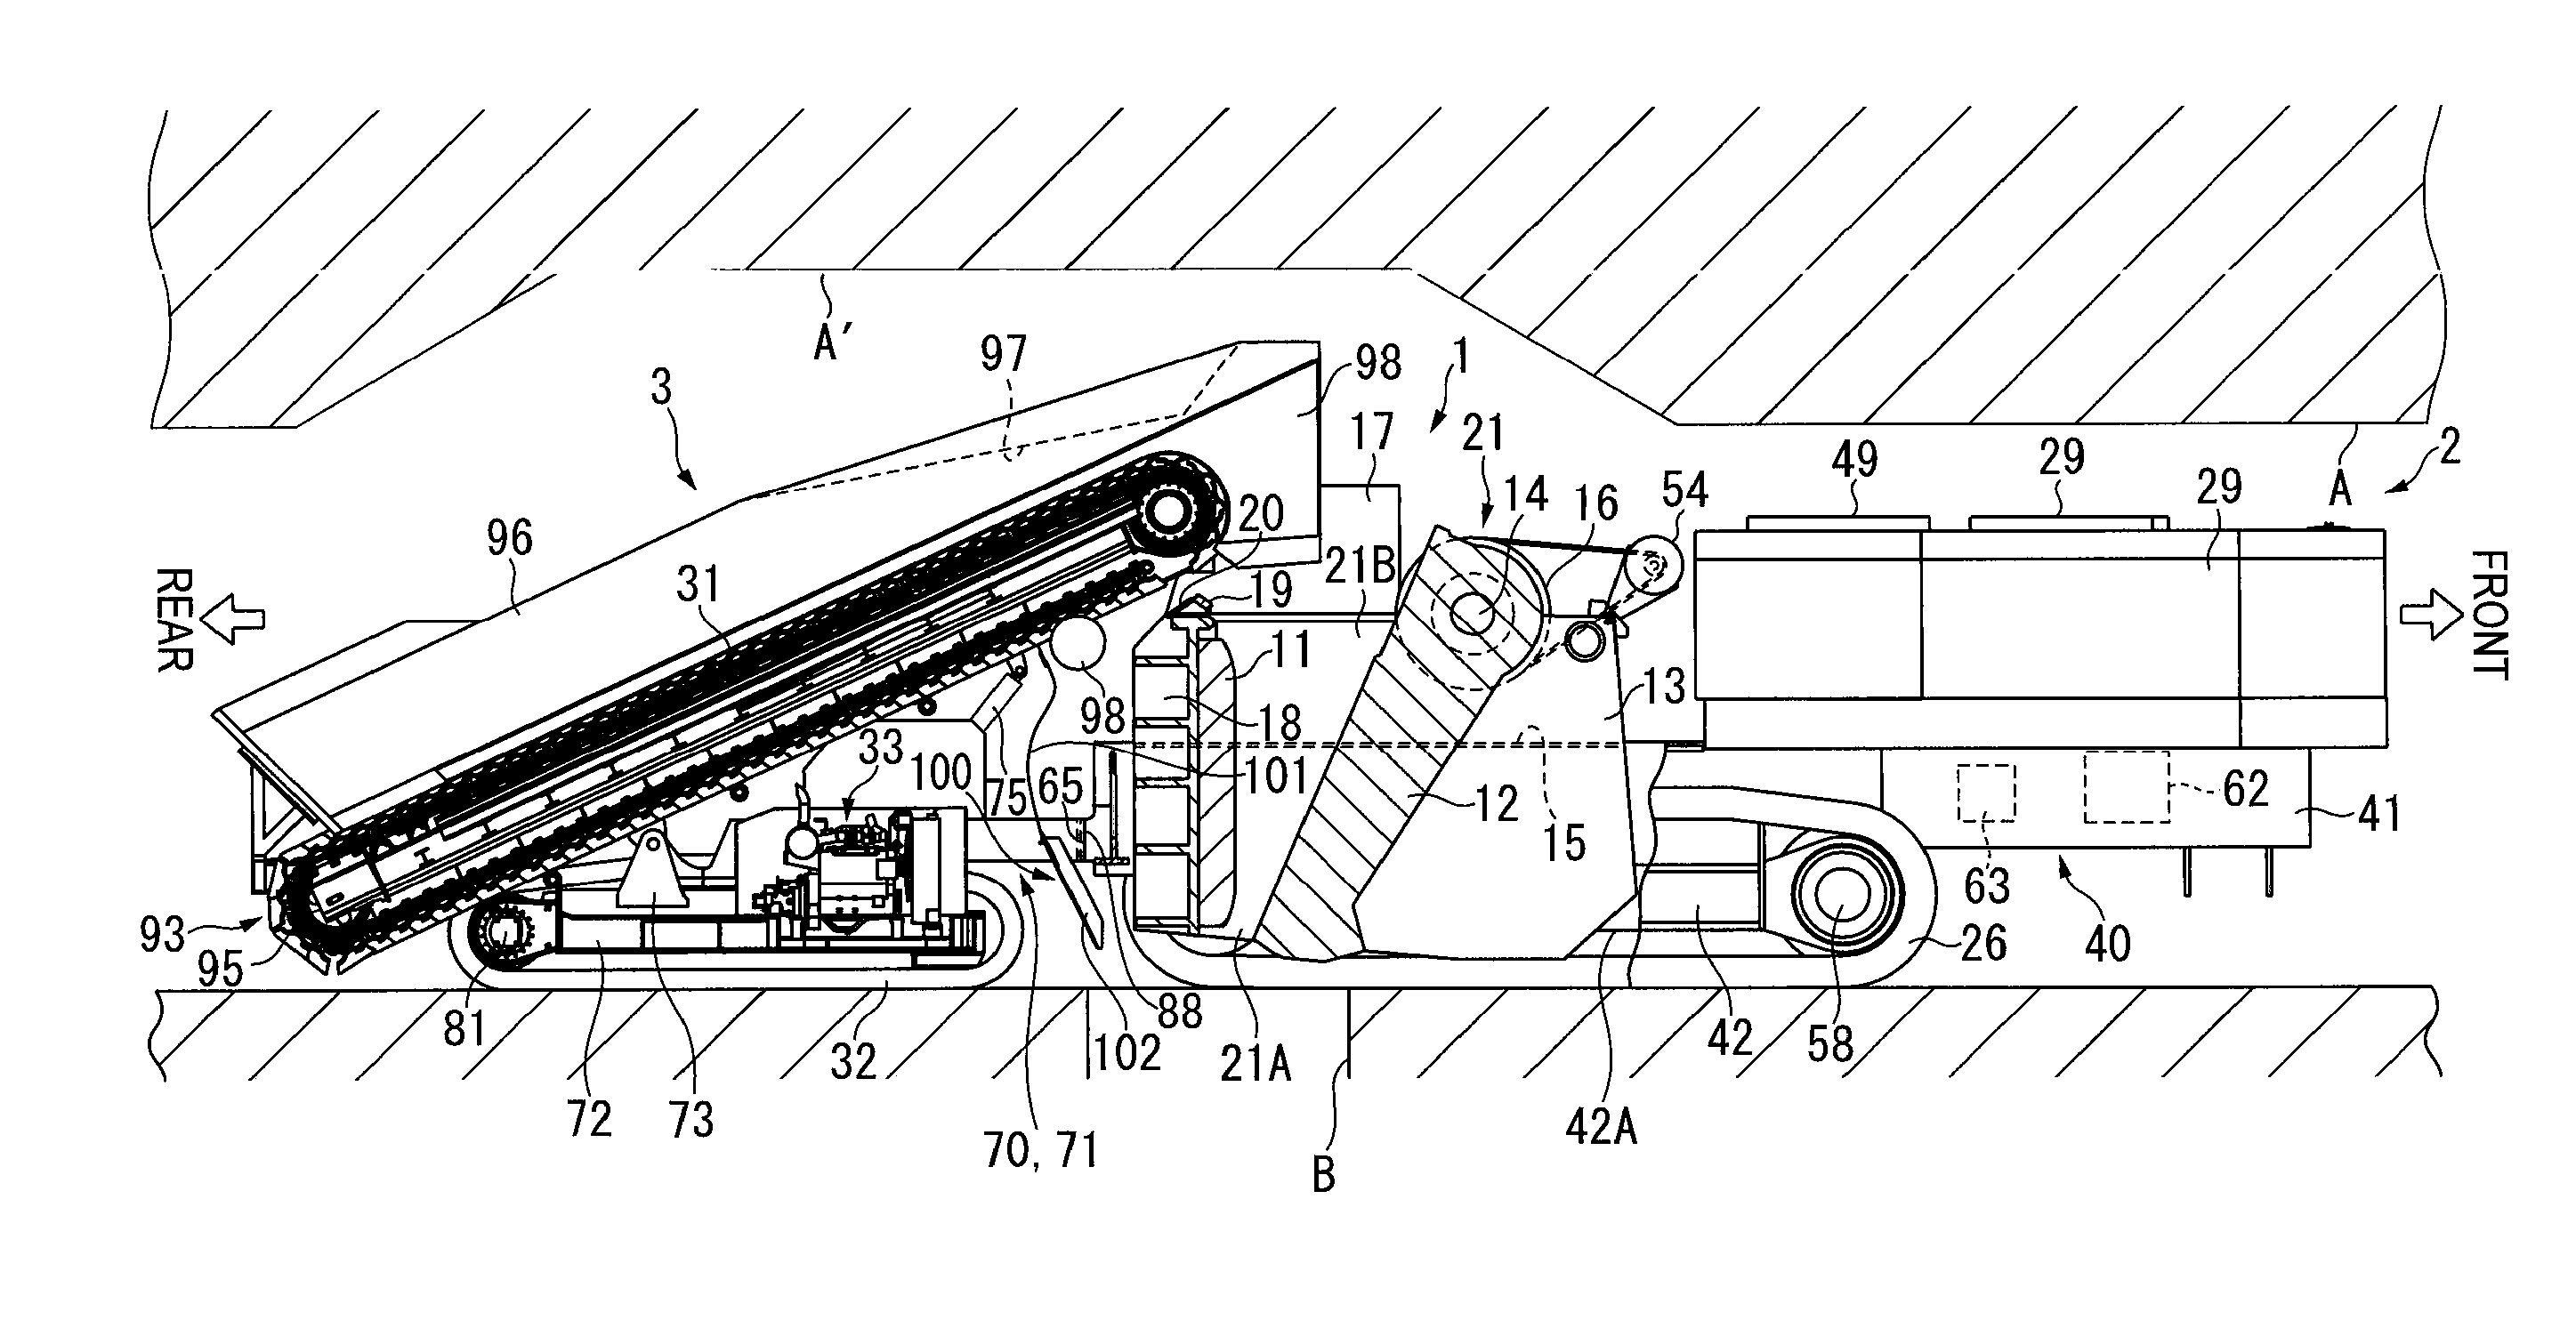 Self-propelled crushing system